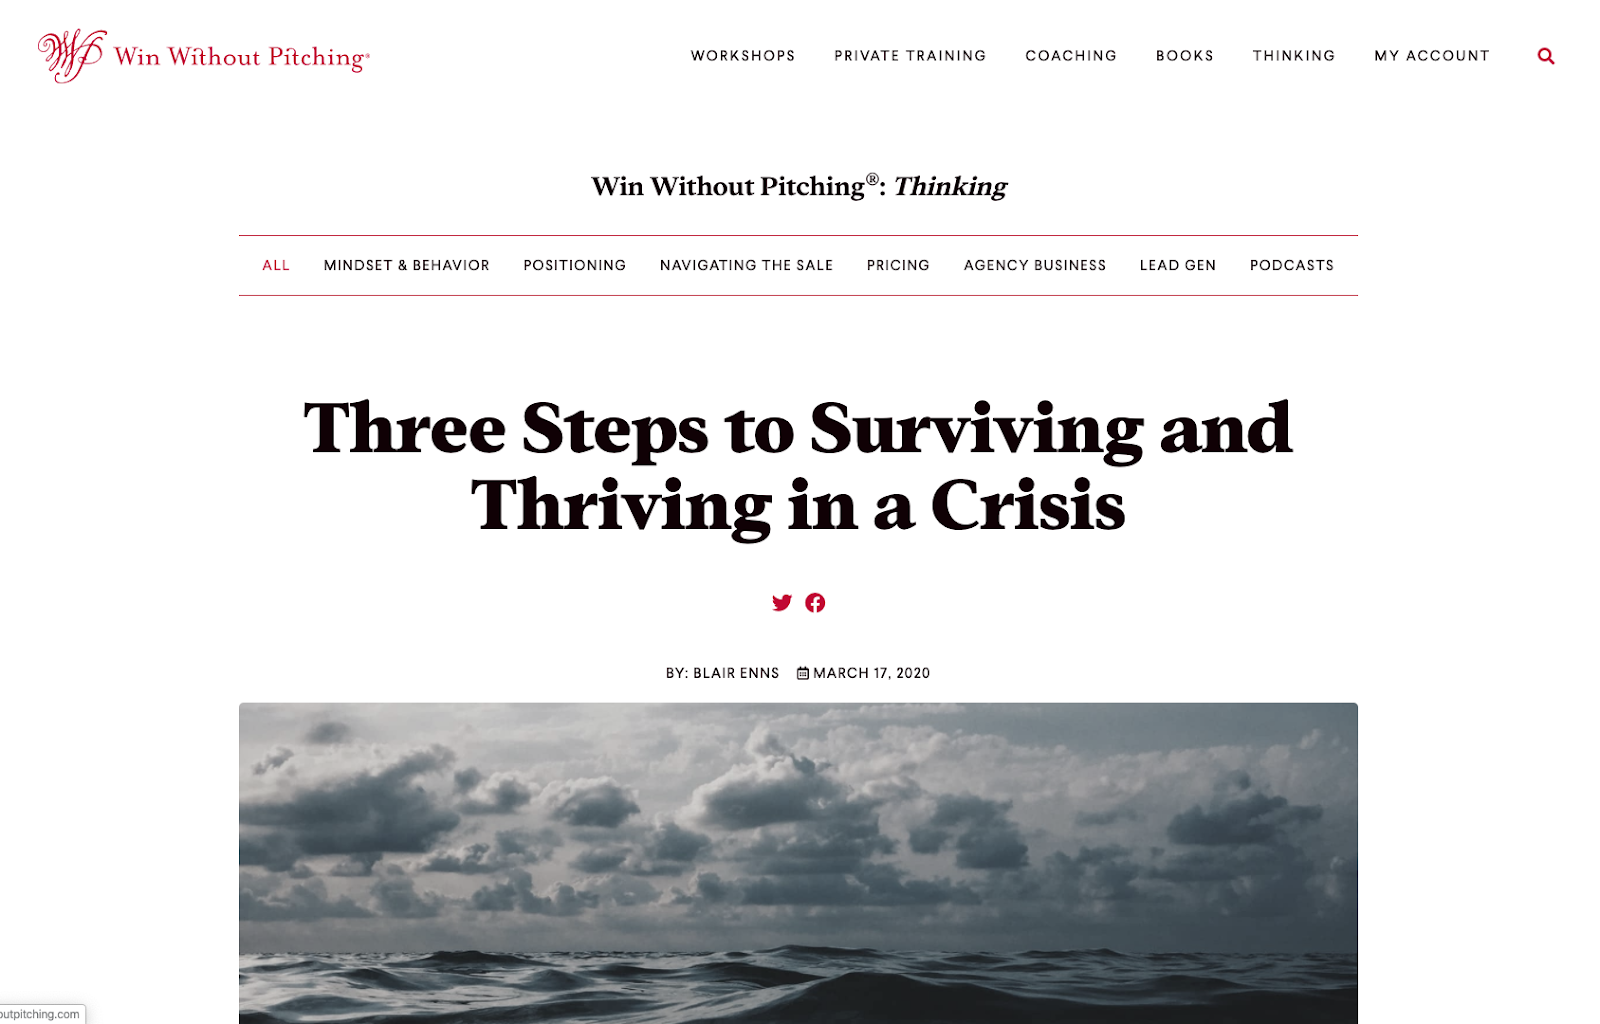 Screenshot of Blair Enns' article 'Three Steps to Surviving and Thriving in a Crisis', published on winwithoutpictching.com